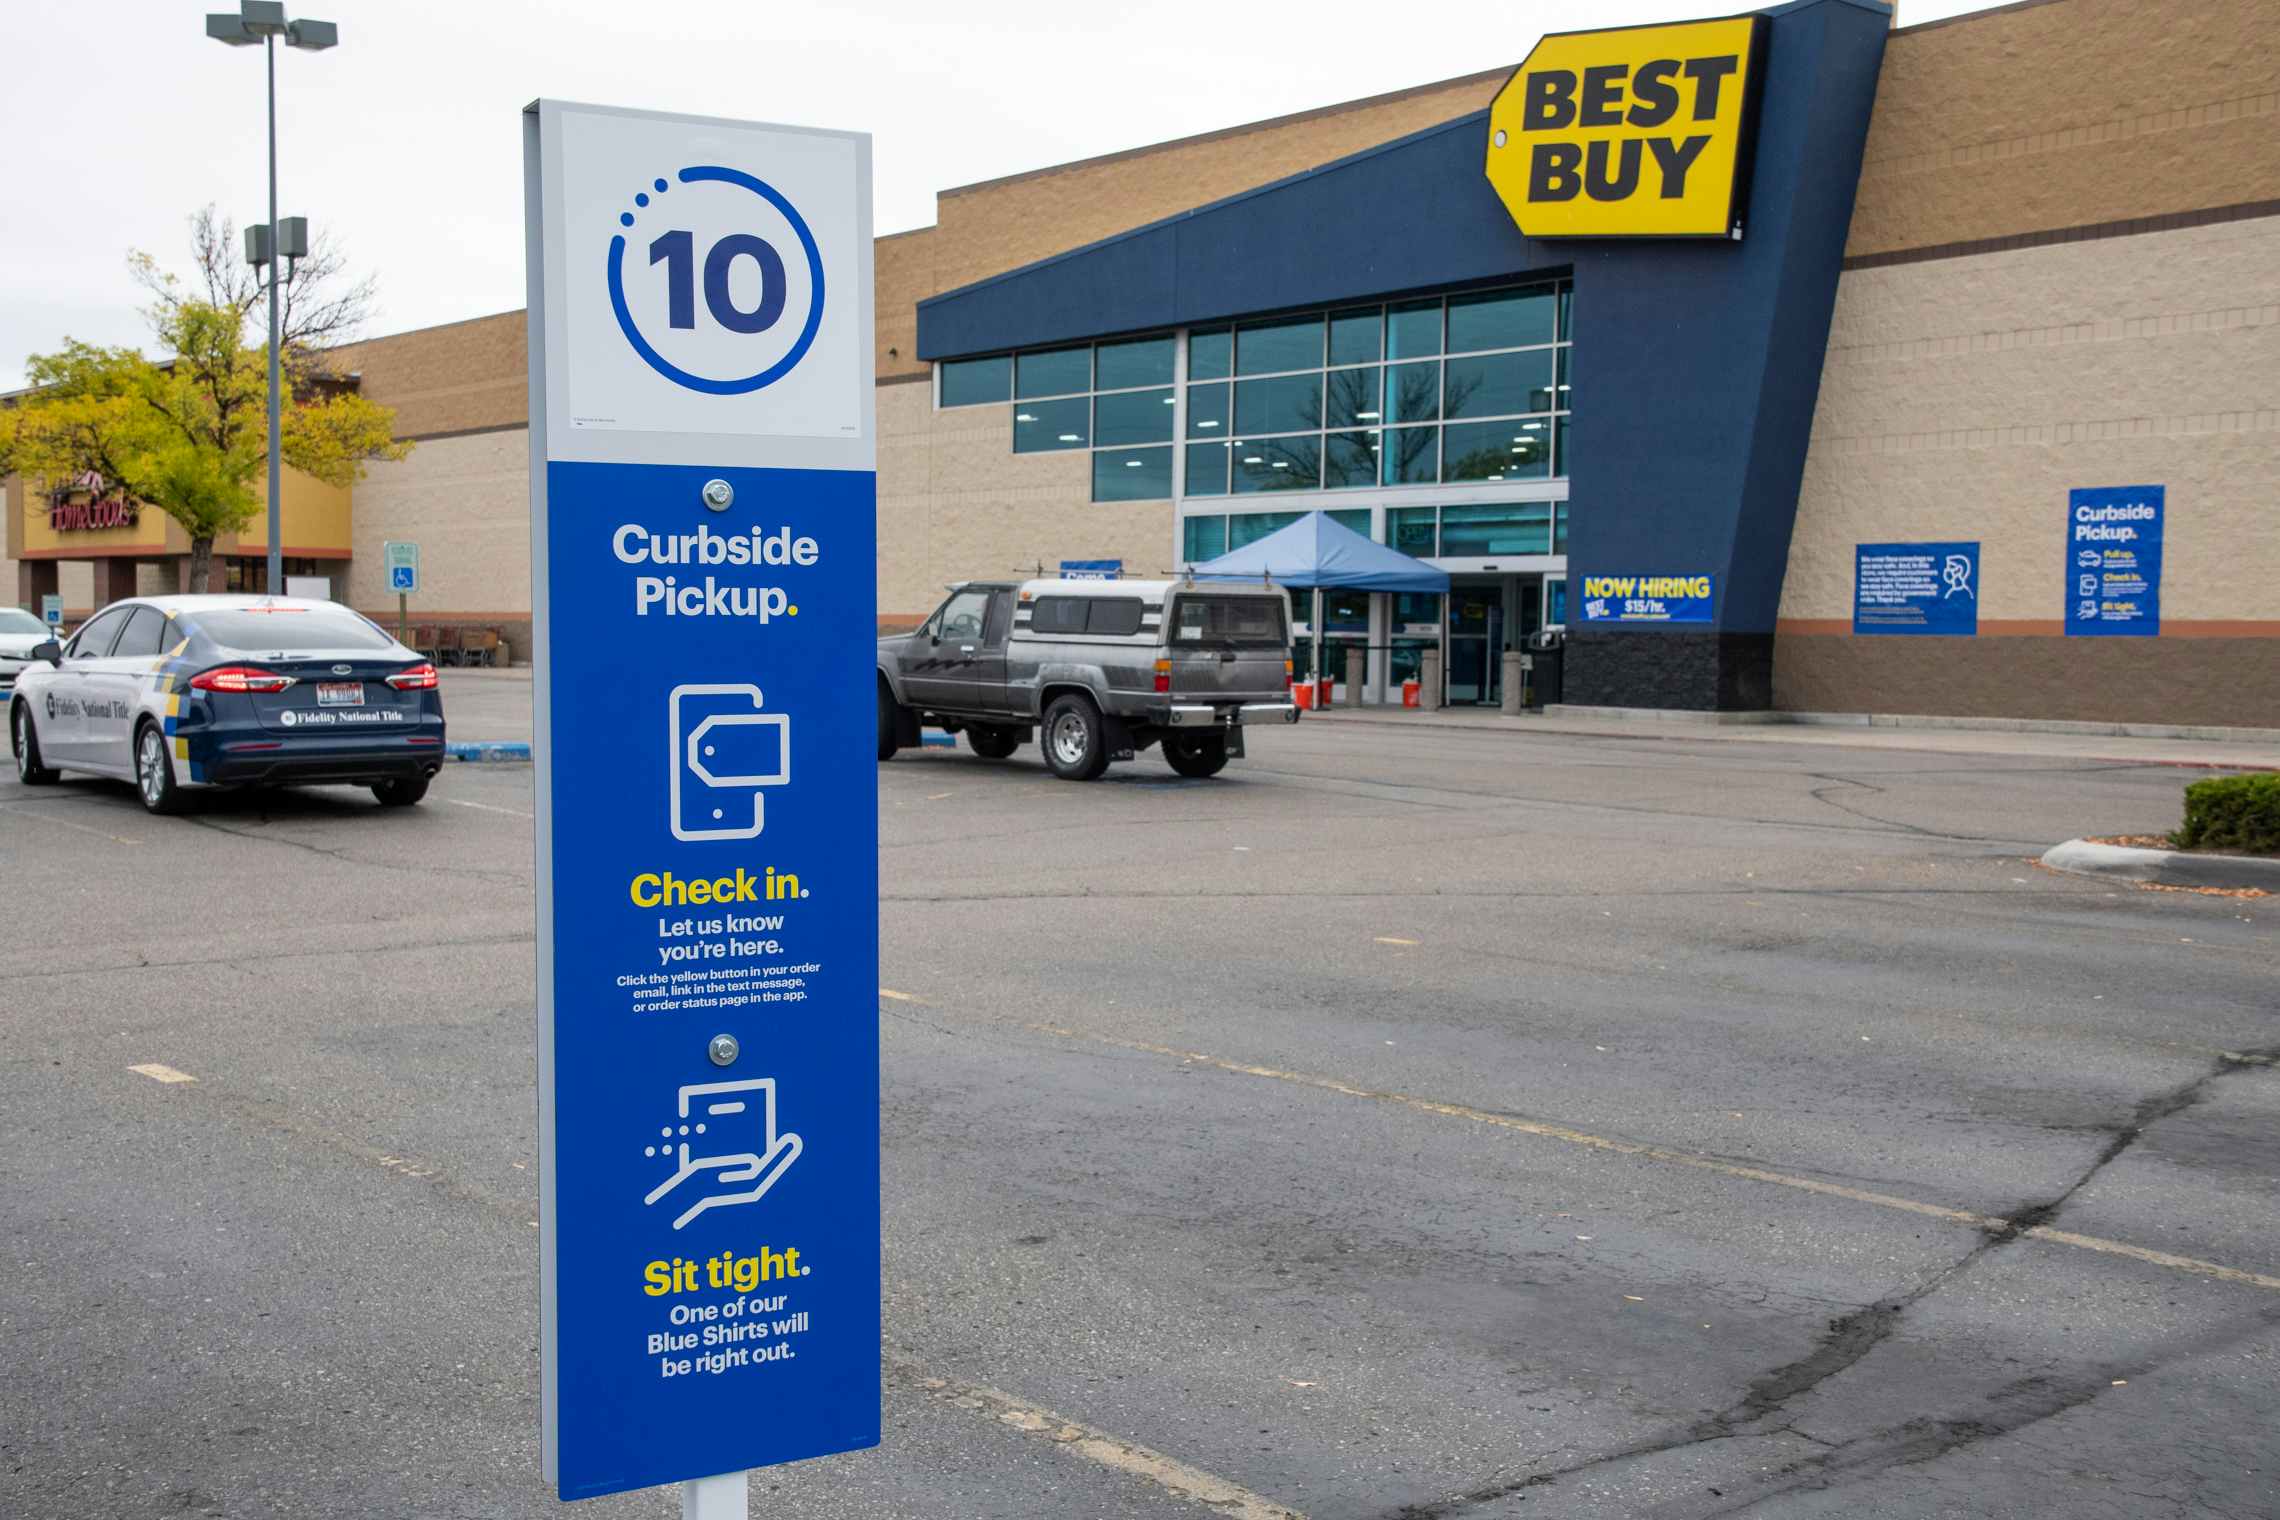 Best buy store front with curbside pickup sign.